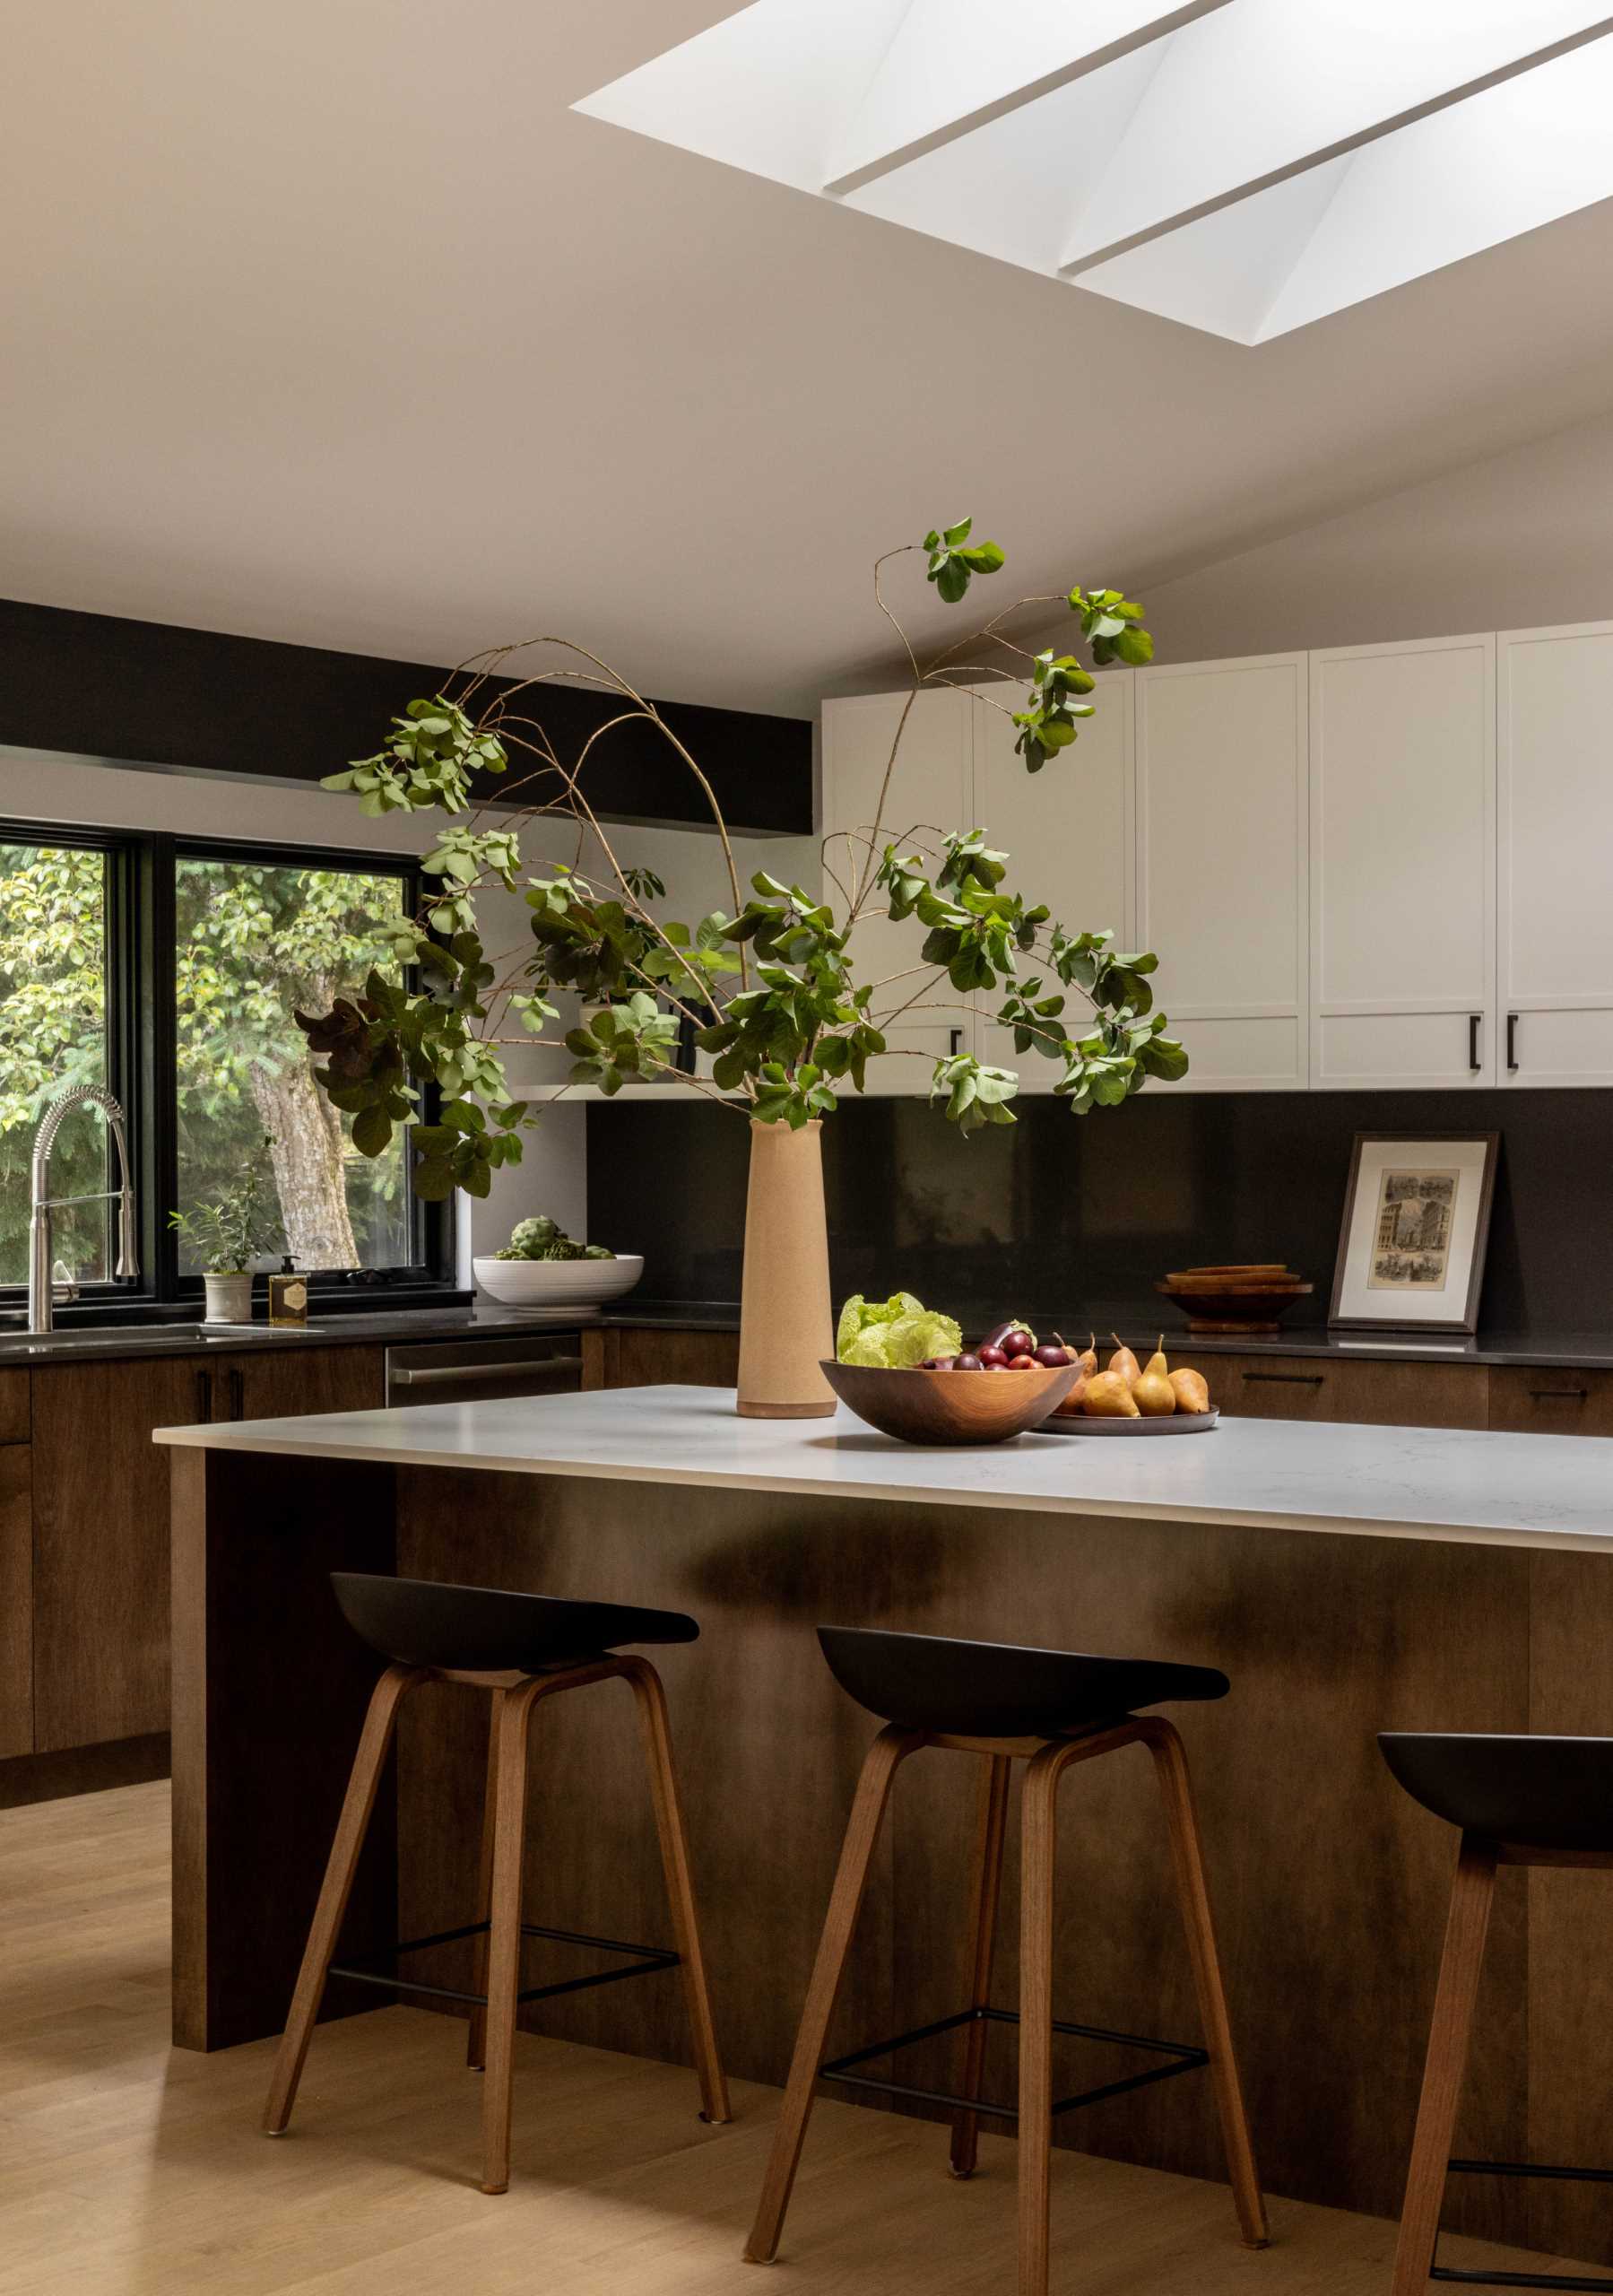 A modern kitchen with wood and white cabinets, black window frames, an island, and a skylight.